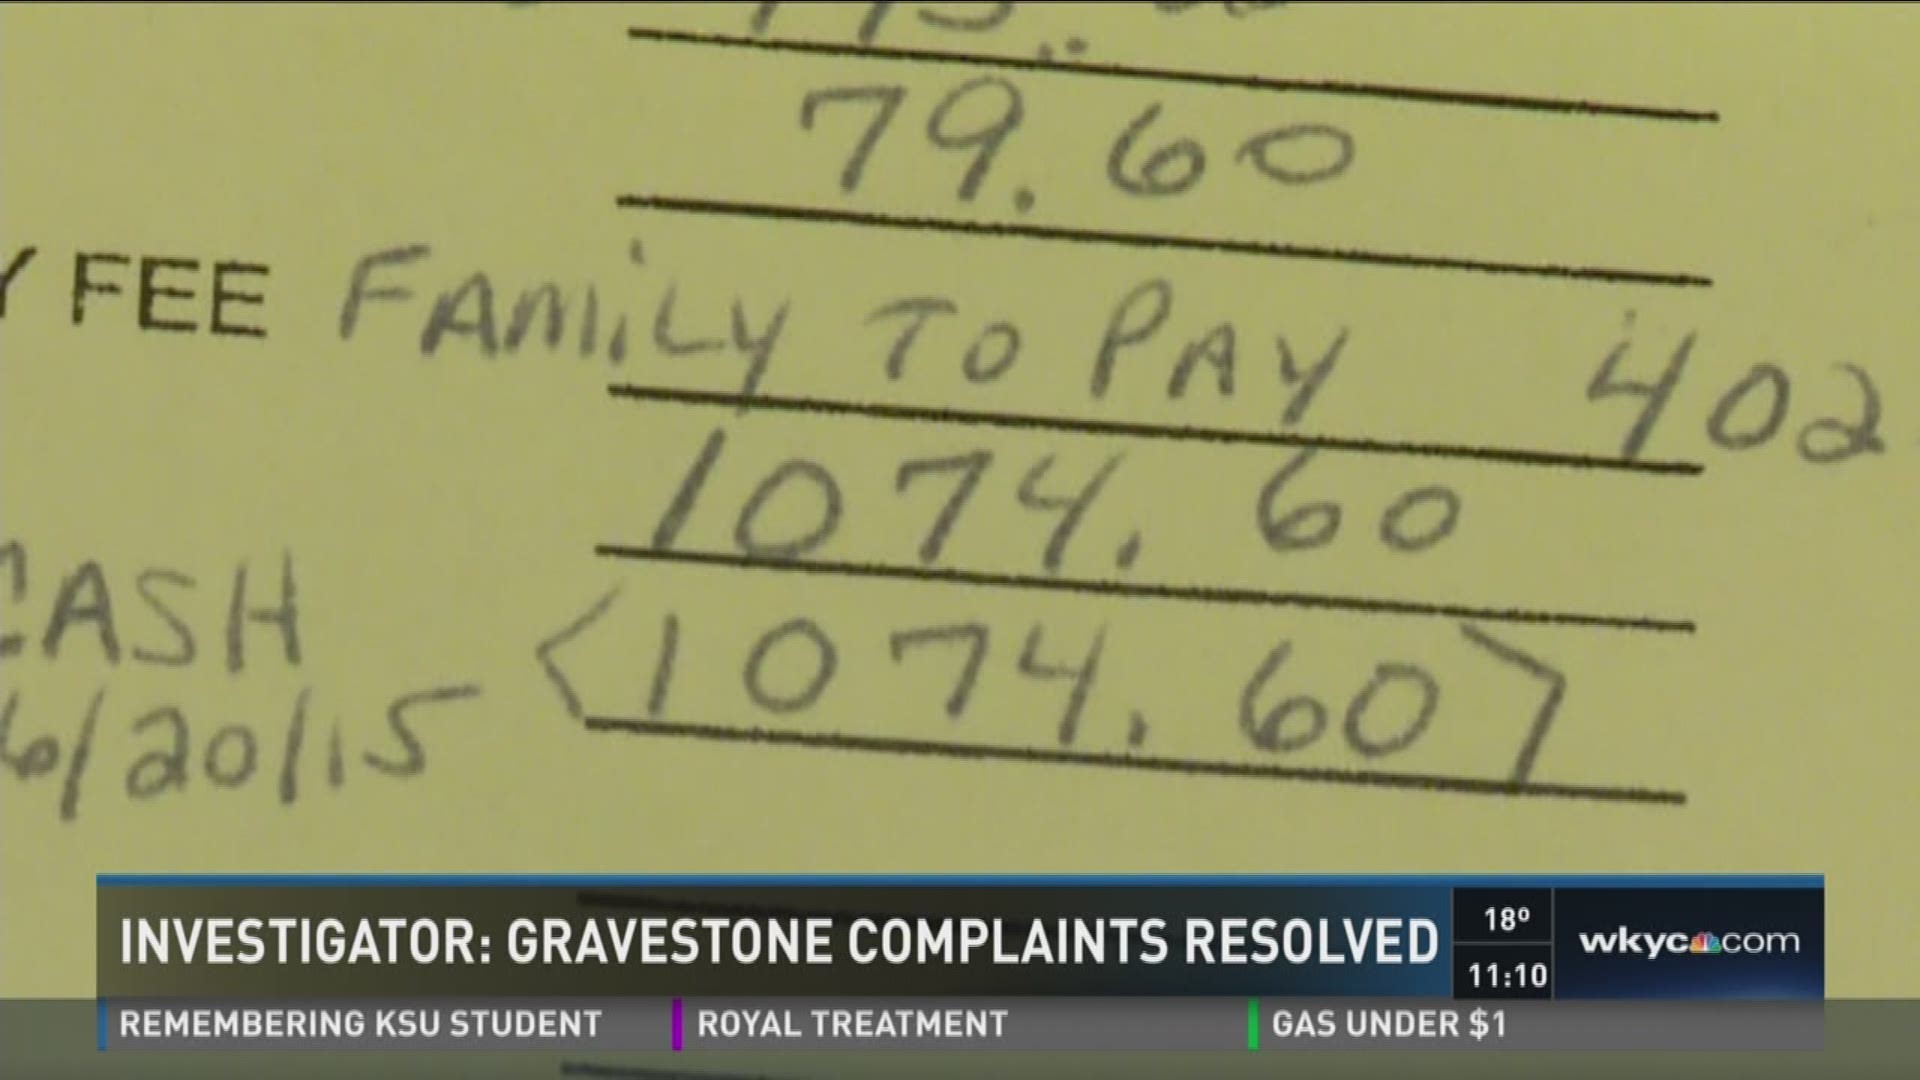 Grieving and angry Clevelanders credit a WKYC Channel 3 News report for prompting full refunds or delivery of gravestones they had ordered more than a year ago.